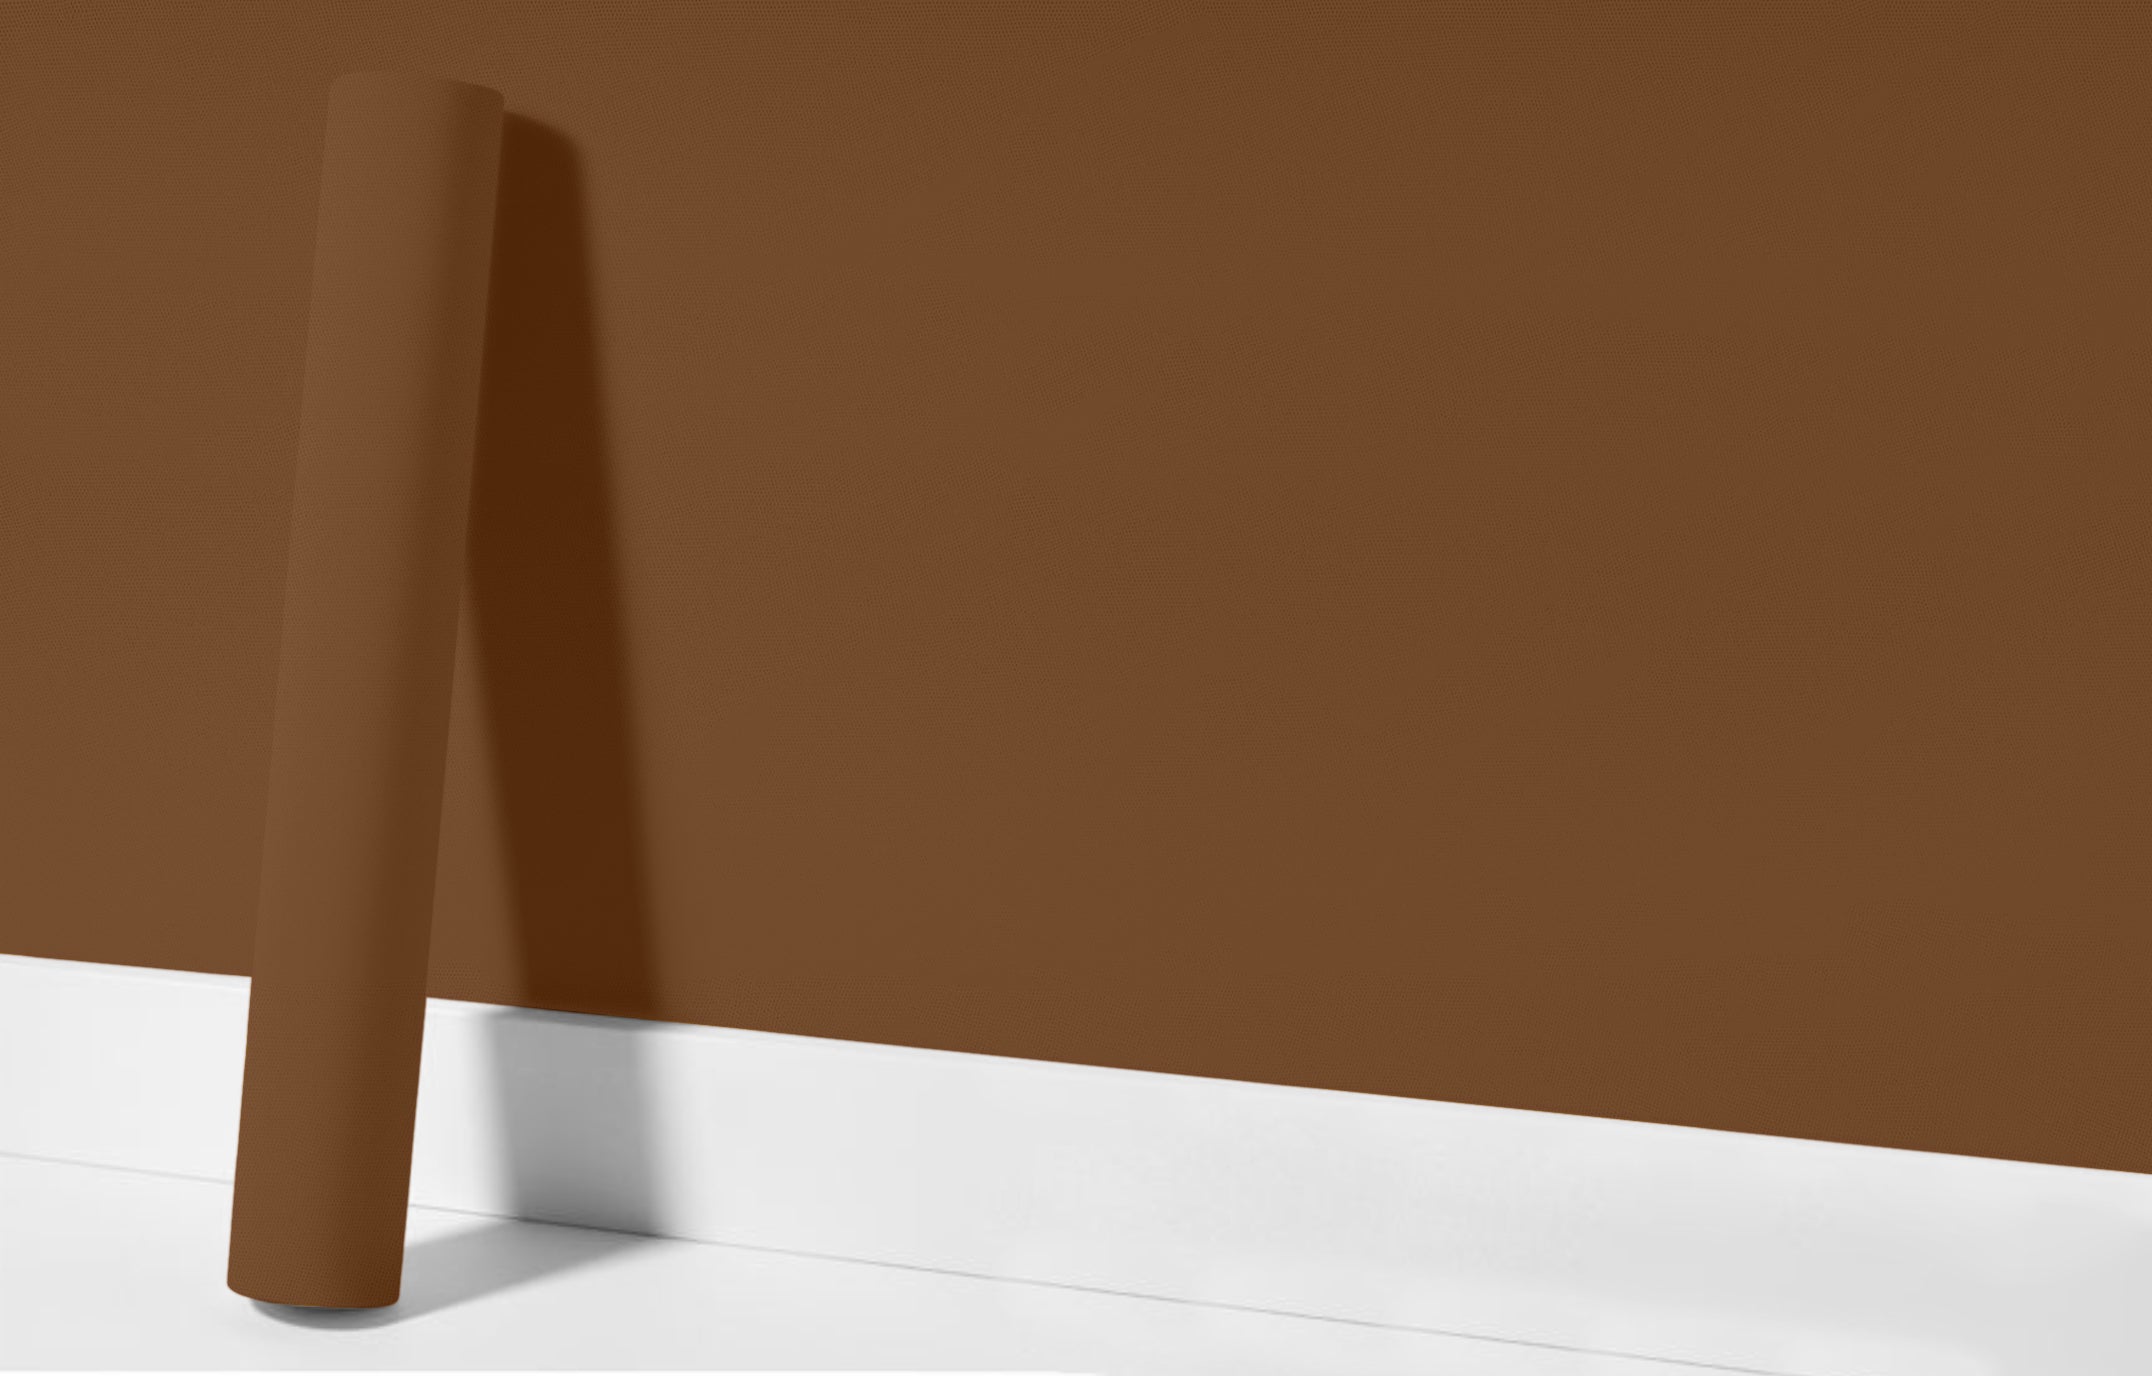 Peel & Stick Removable Re-usable Paint - Color RAL 8007 Fawn Brown - offRAL™ - RALRAW LLC, USA